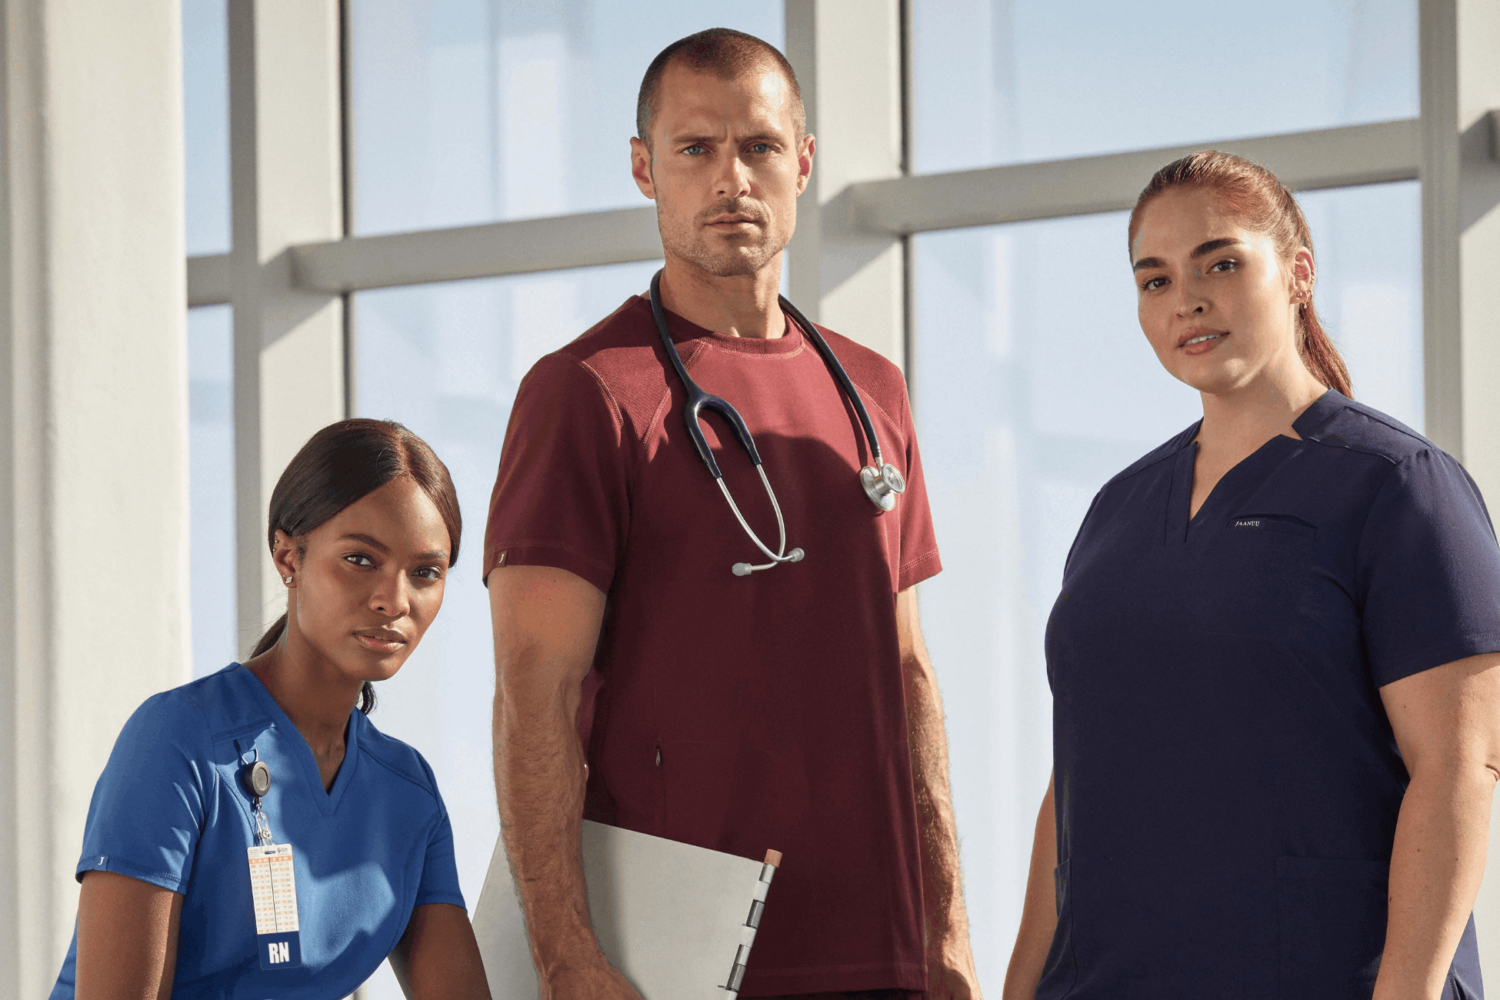 Man in between two women wearing different color scrubs